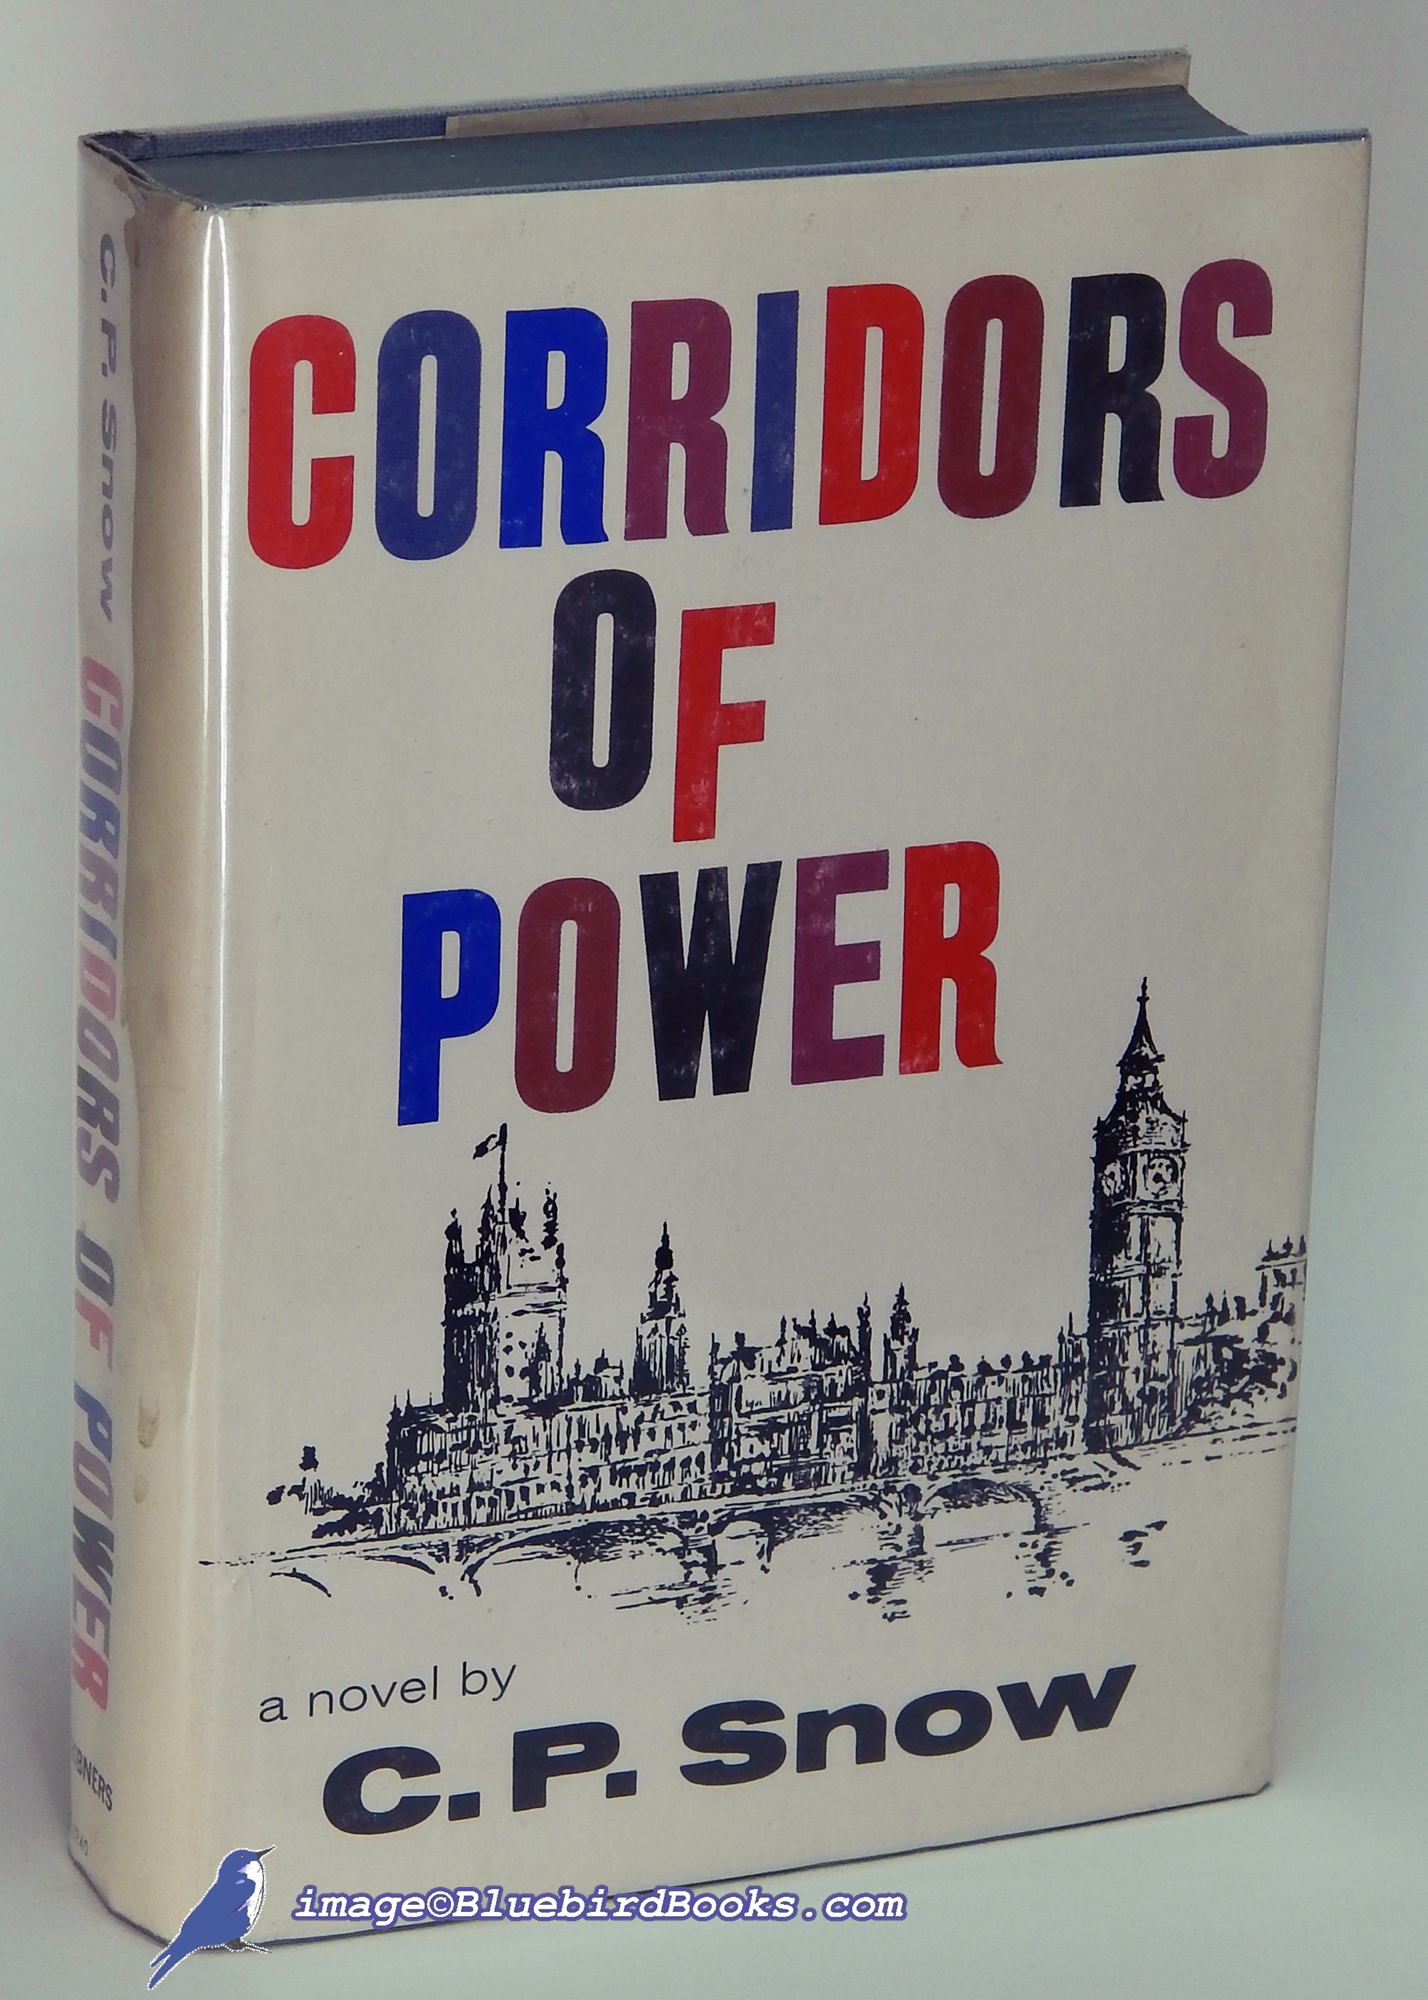 SNOW, C. P. - Corridors of Power (Strangers and Brothers Series)